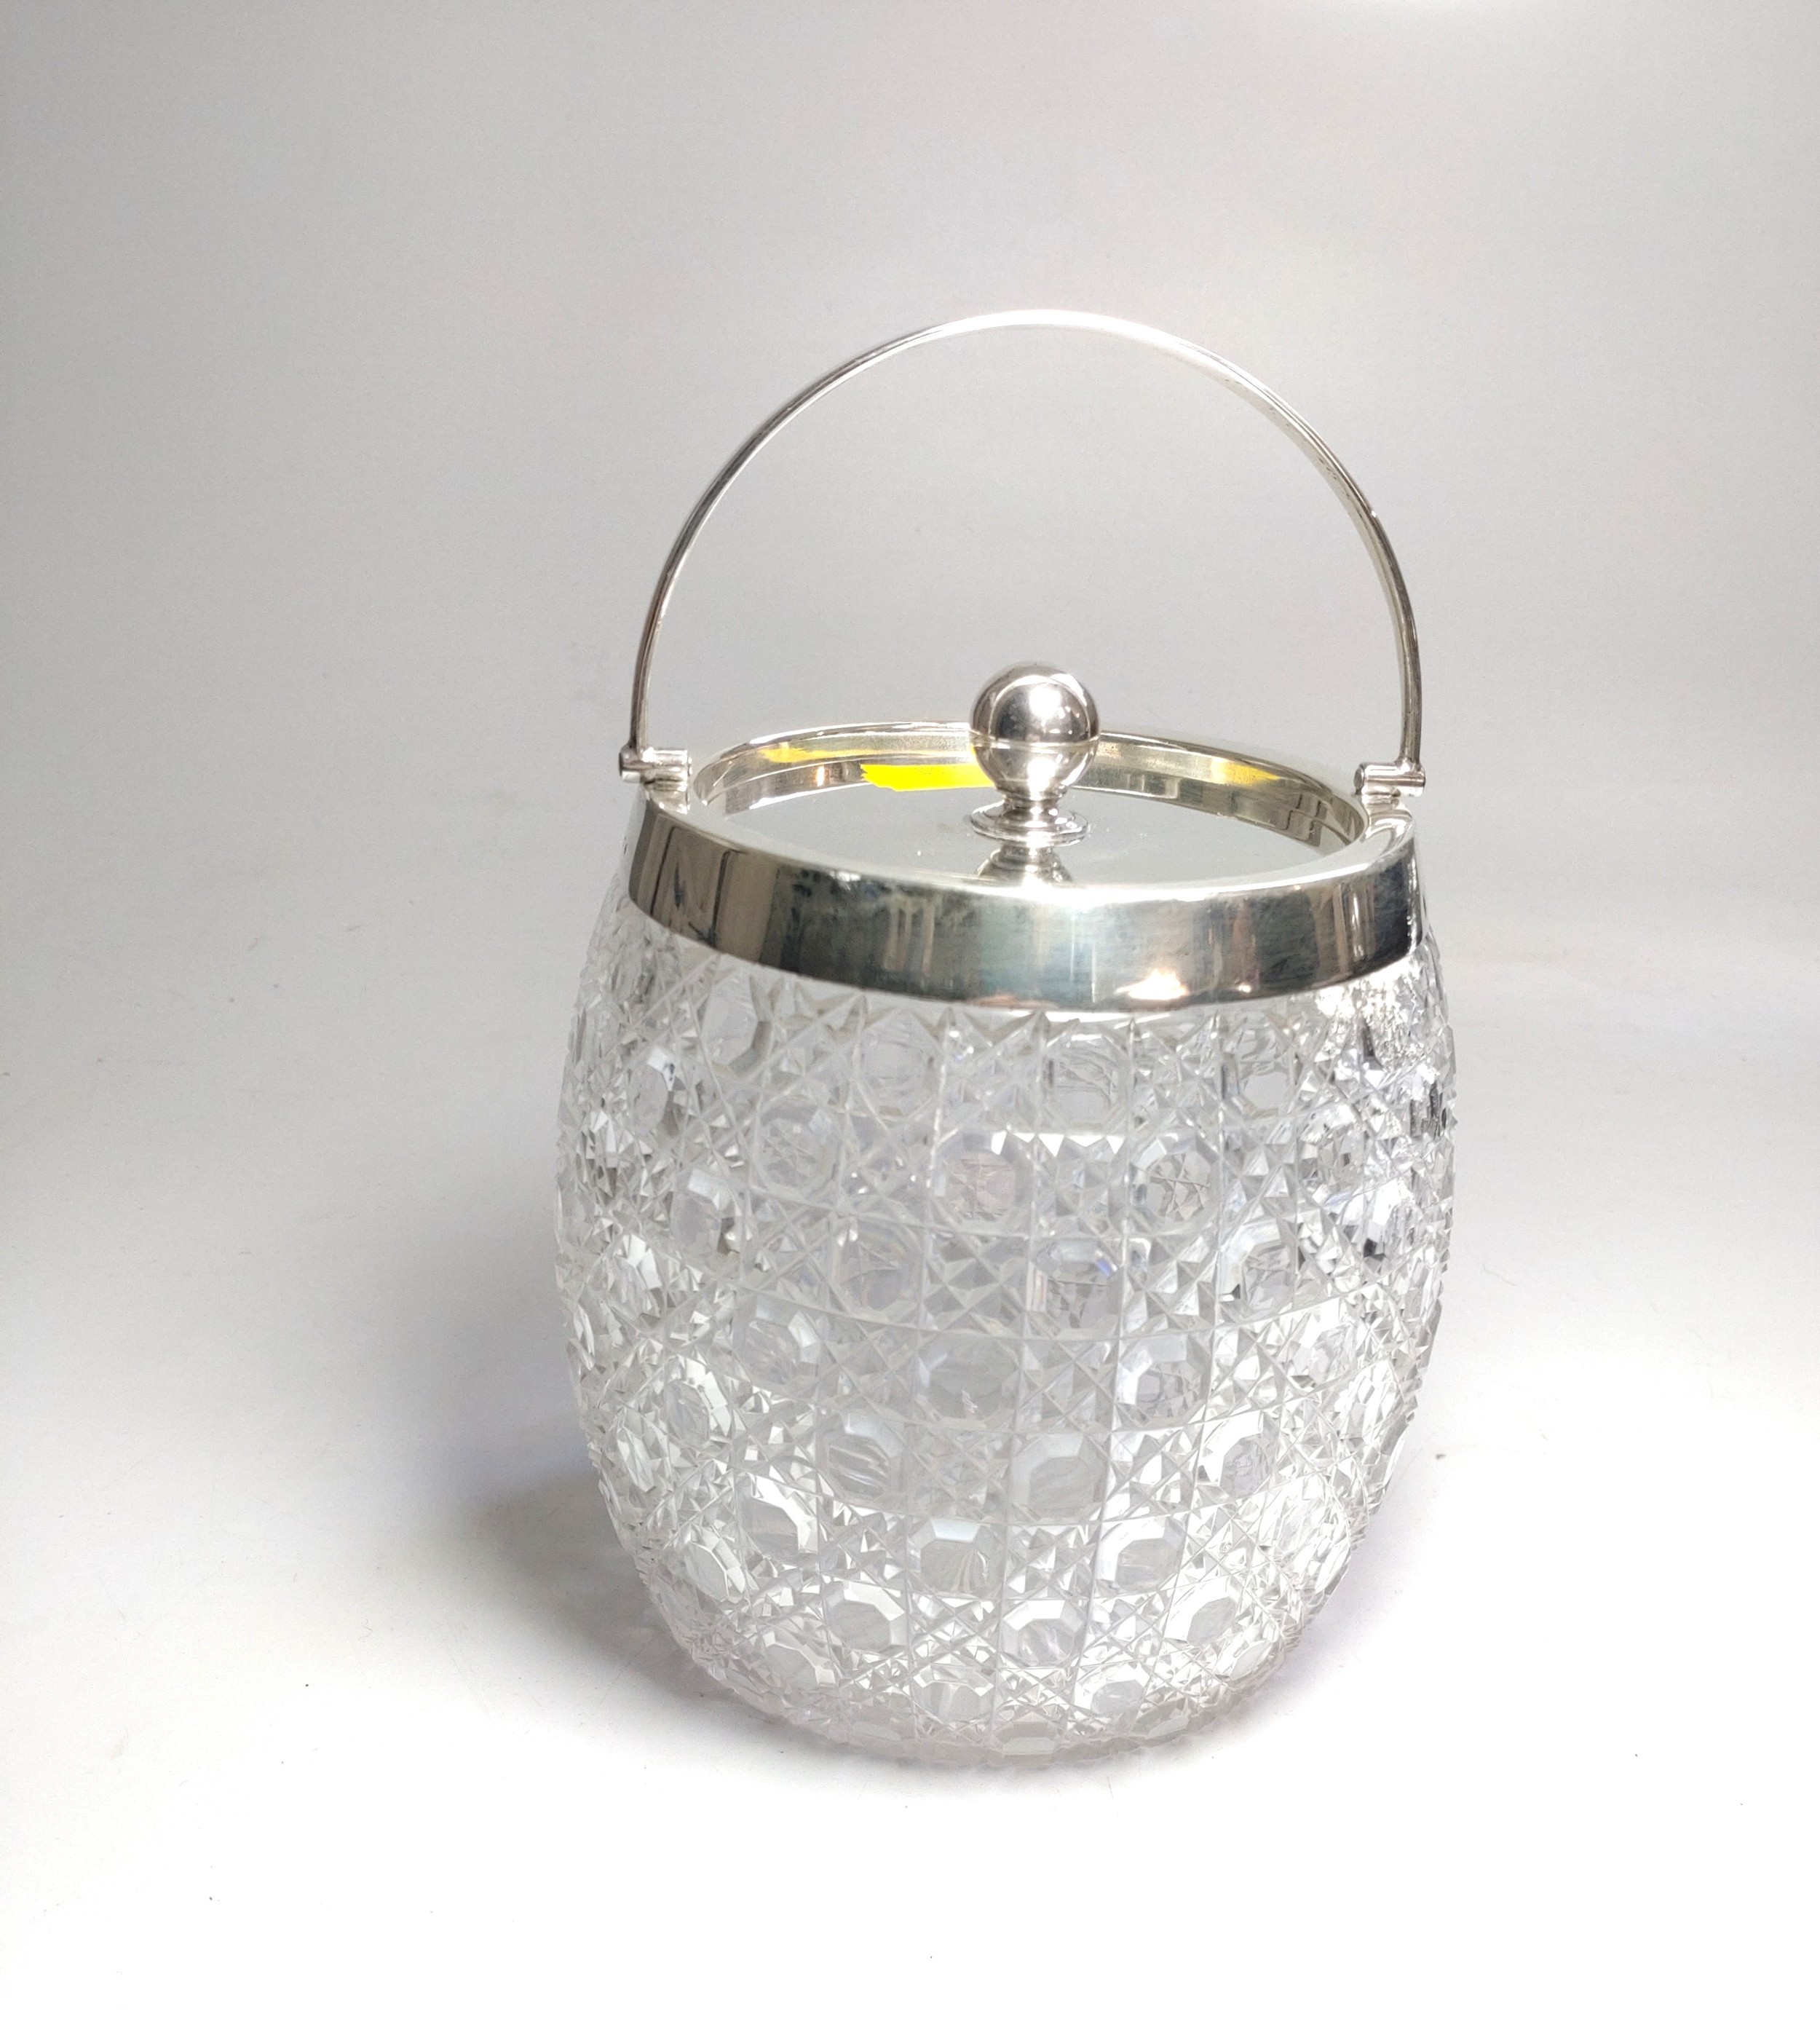 Silver mounted biscuit barrel